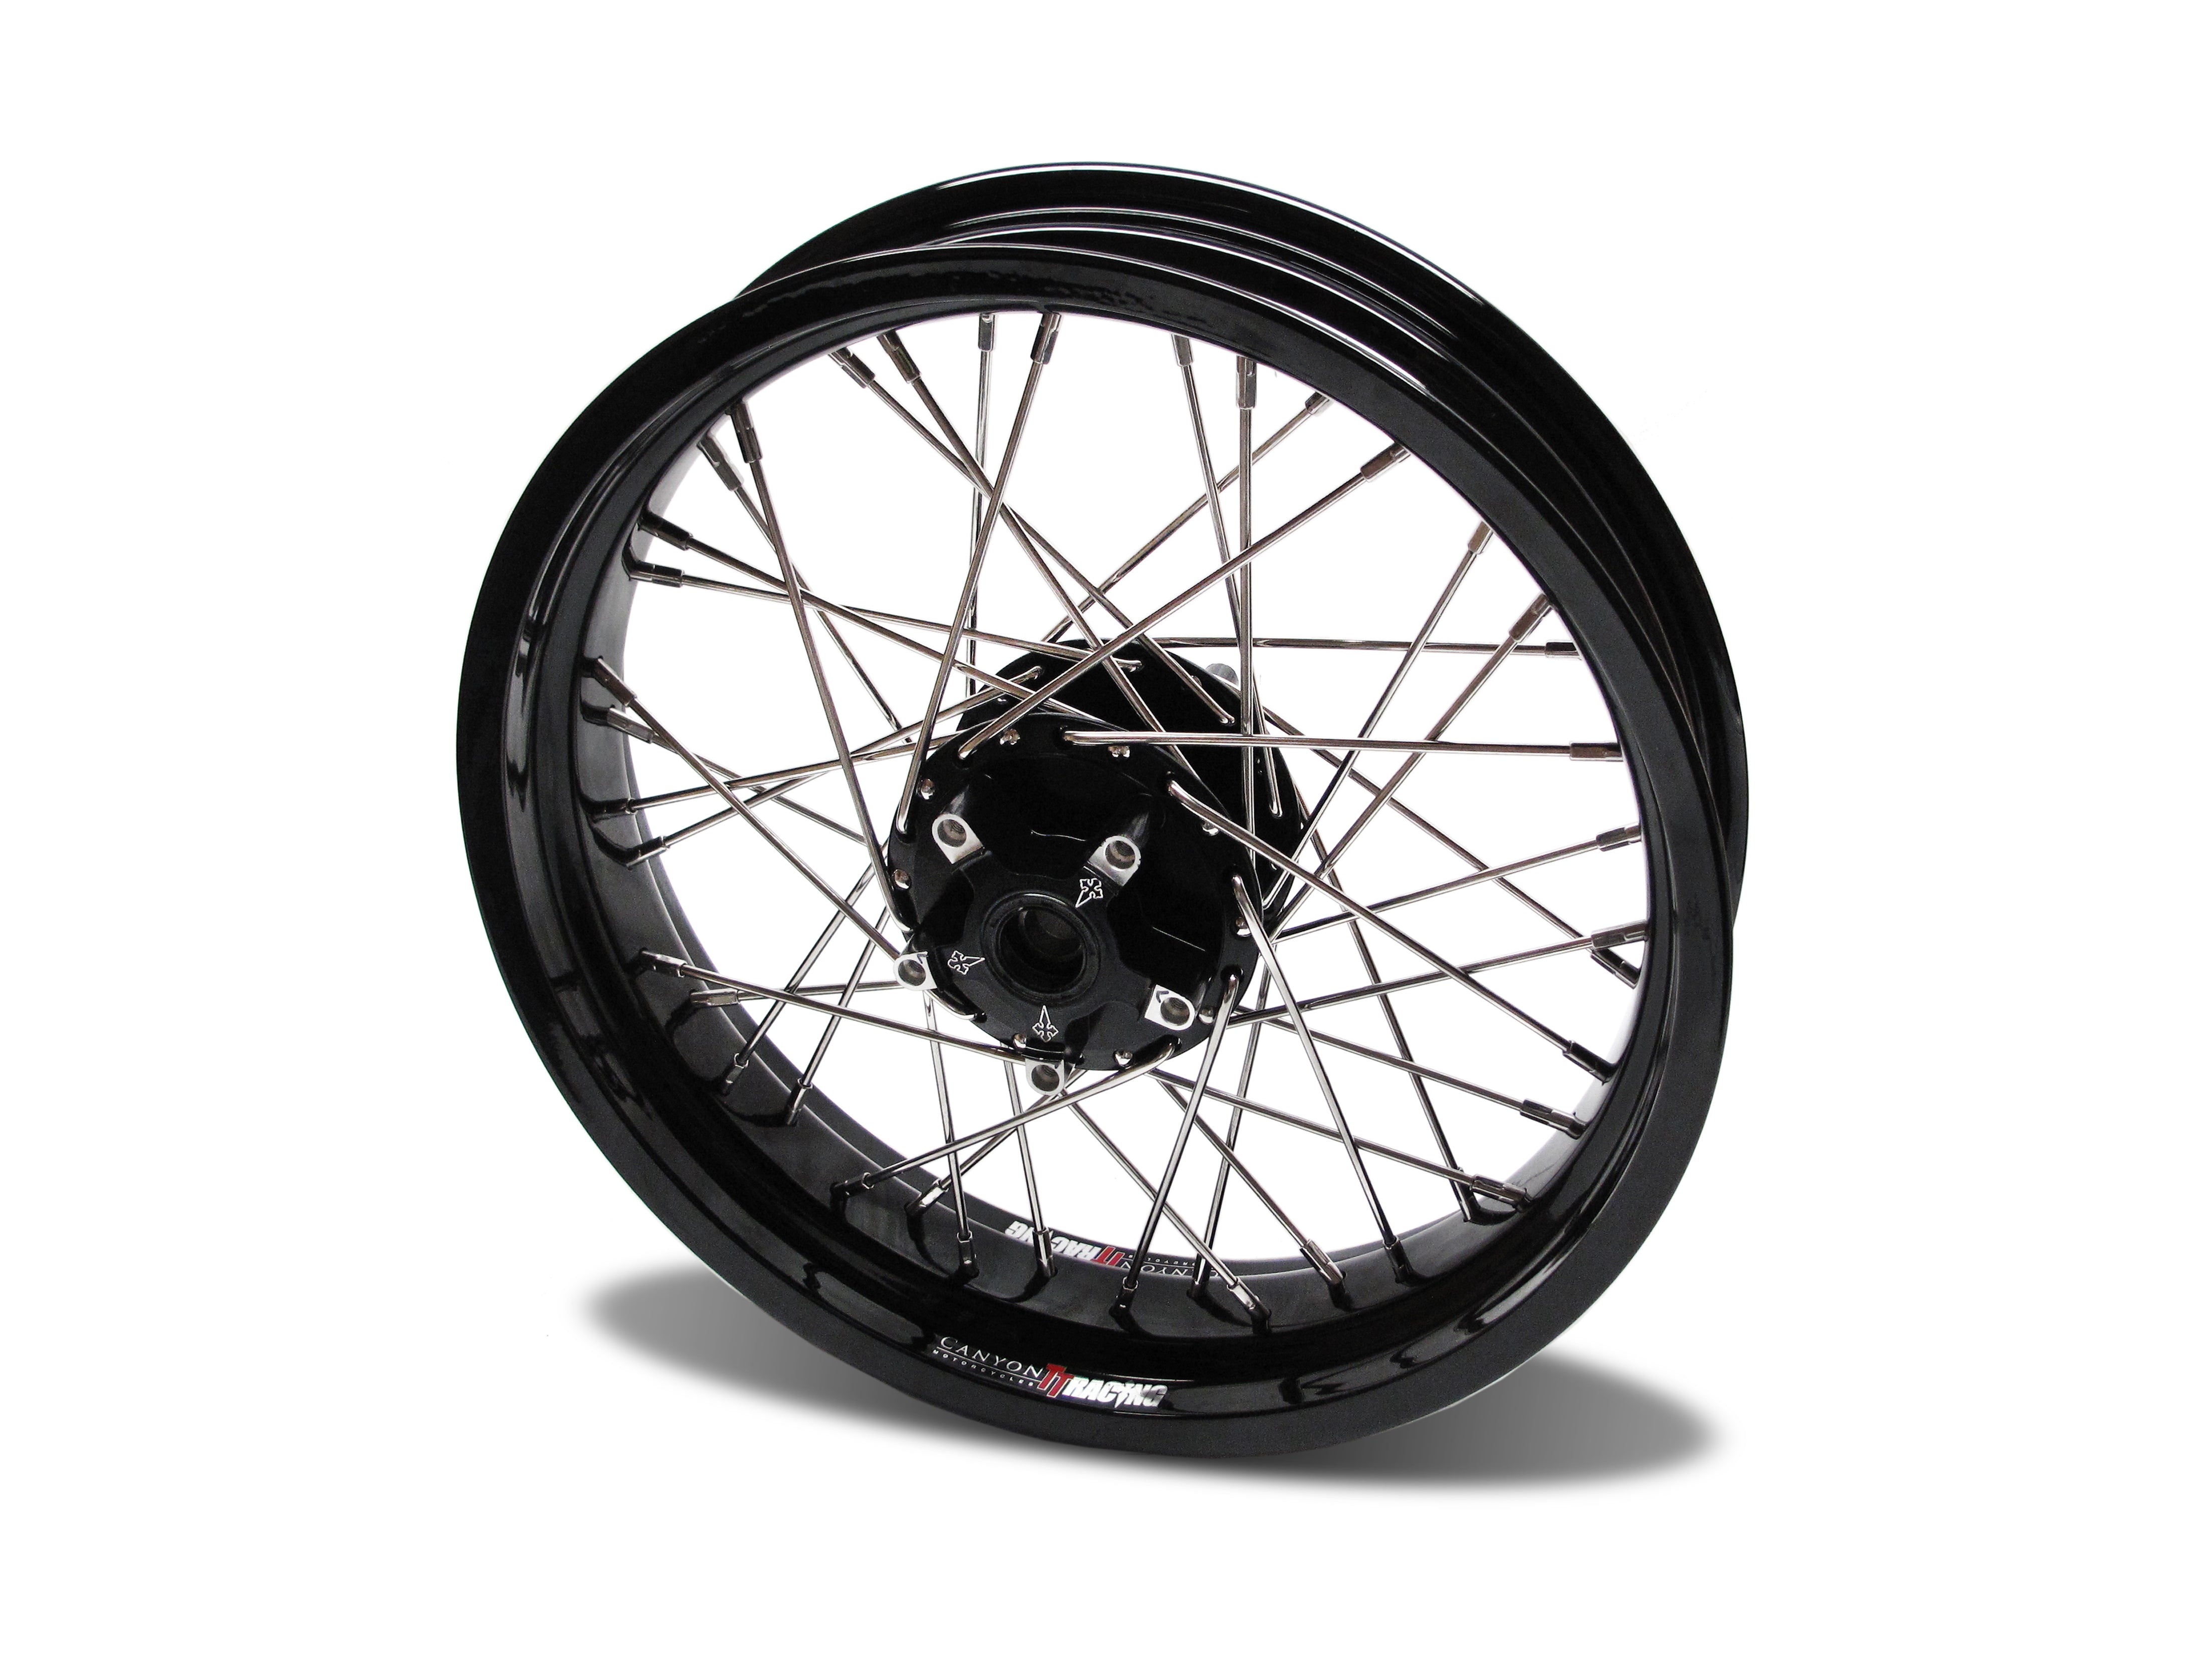 40 Spoke Alloy Wide Wheel Kit Stage 1 - Canyon Motorcycles